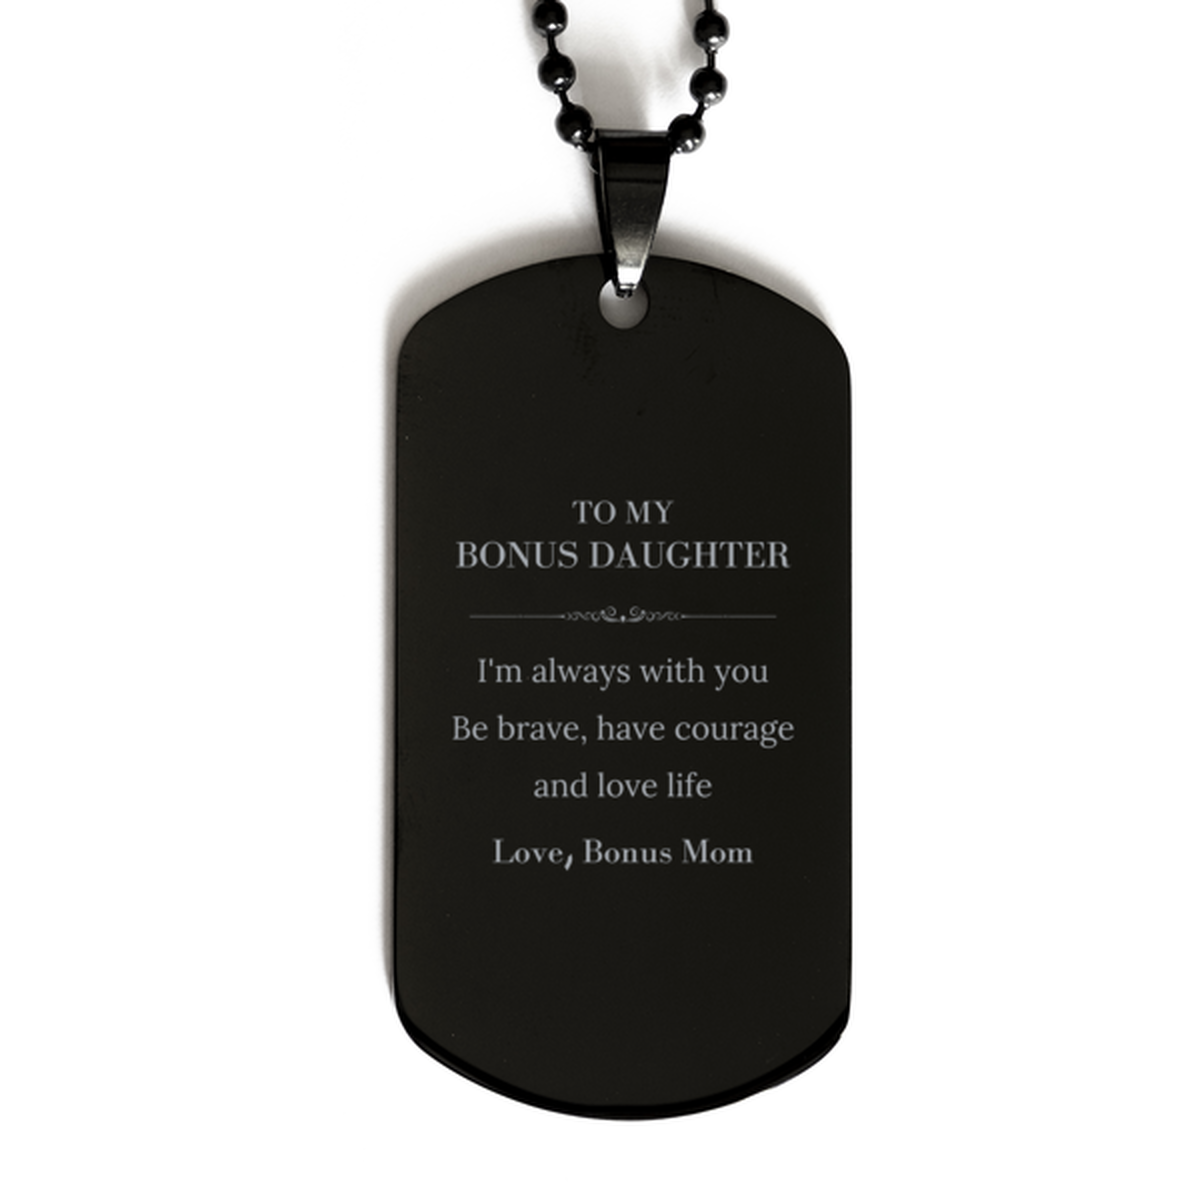 To My Bonus Daughter Gifts from Bonus Mom, Unique Black Dog Tag Inspirational Christmas Birthday Graduation Gifts for Bonus Daughter I'm always with you. Be brave, have courage and love life. Love, Bonus Mom